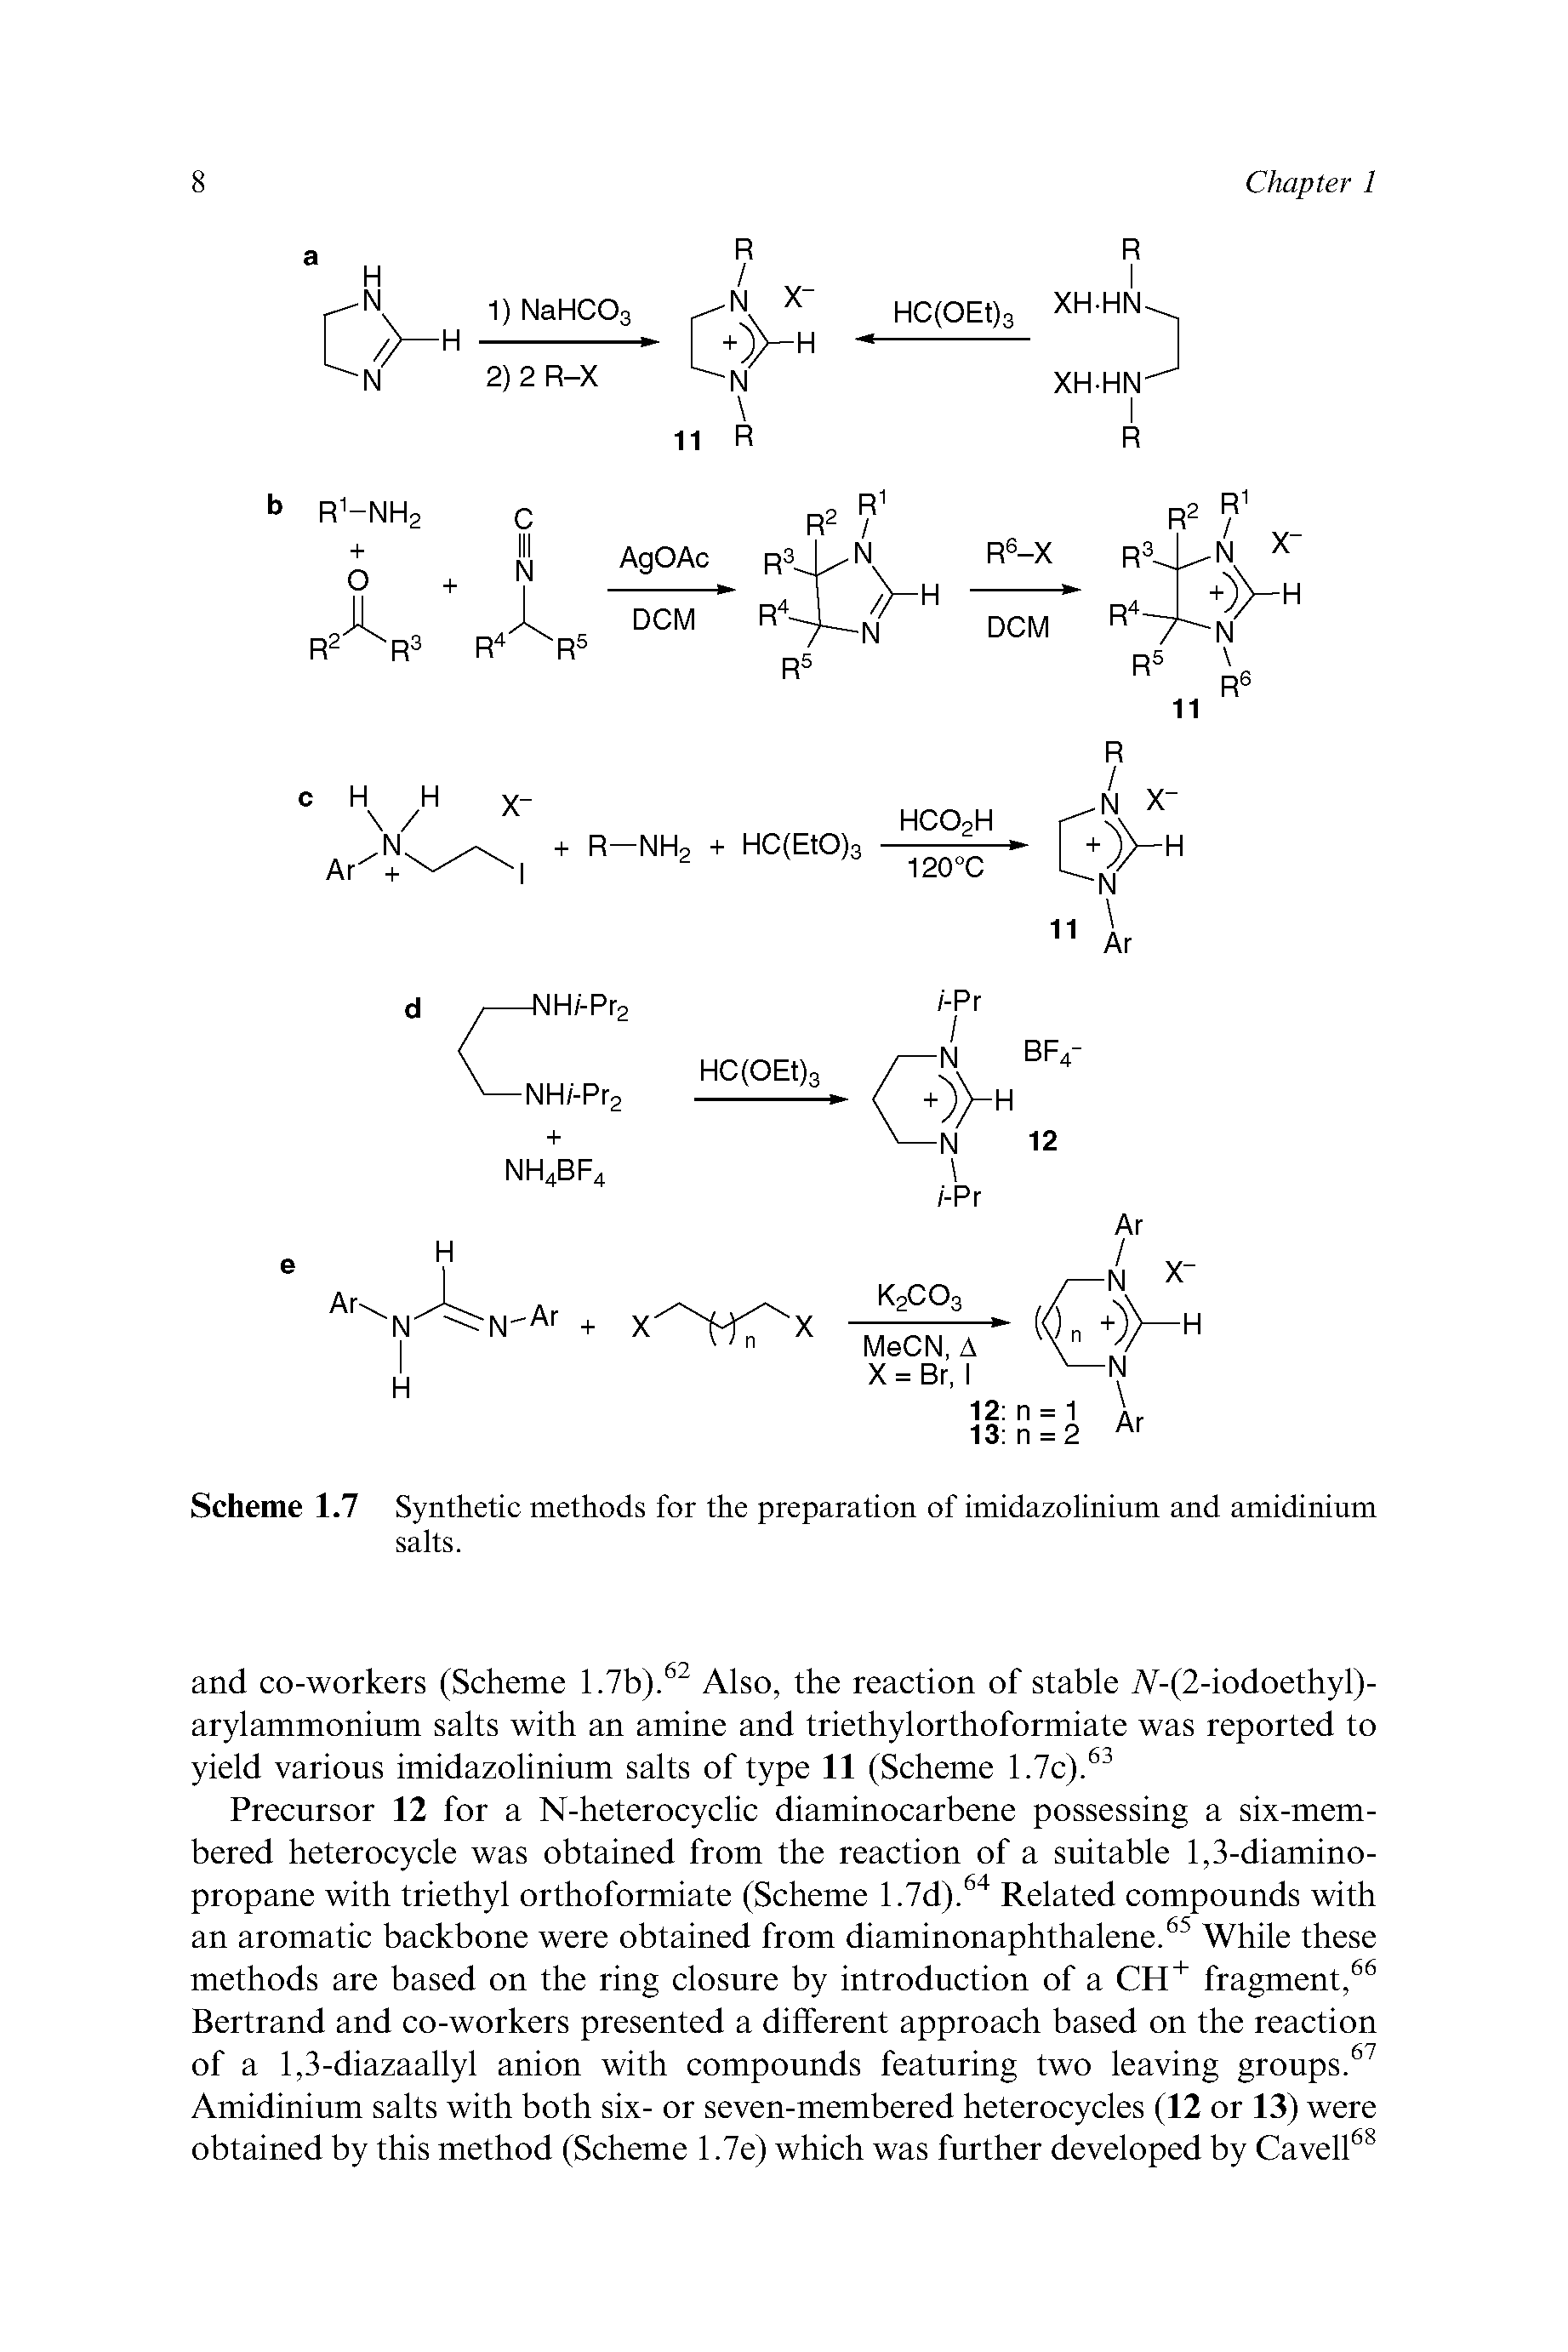 Scheme 1.7 Synthetic methods for the preparation of imidazolinium and amidinium salts.